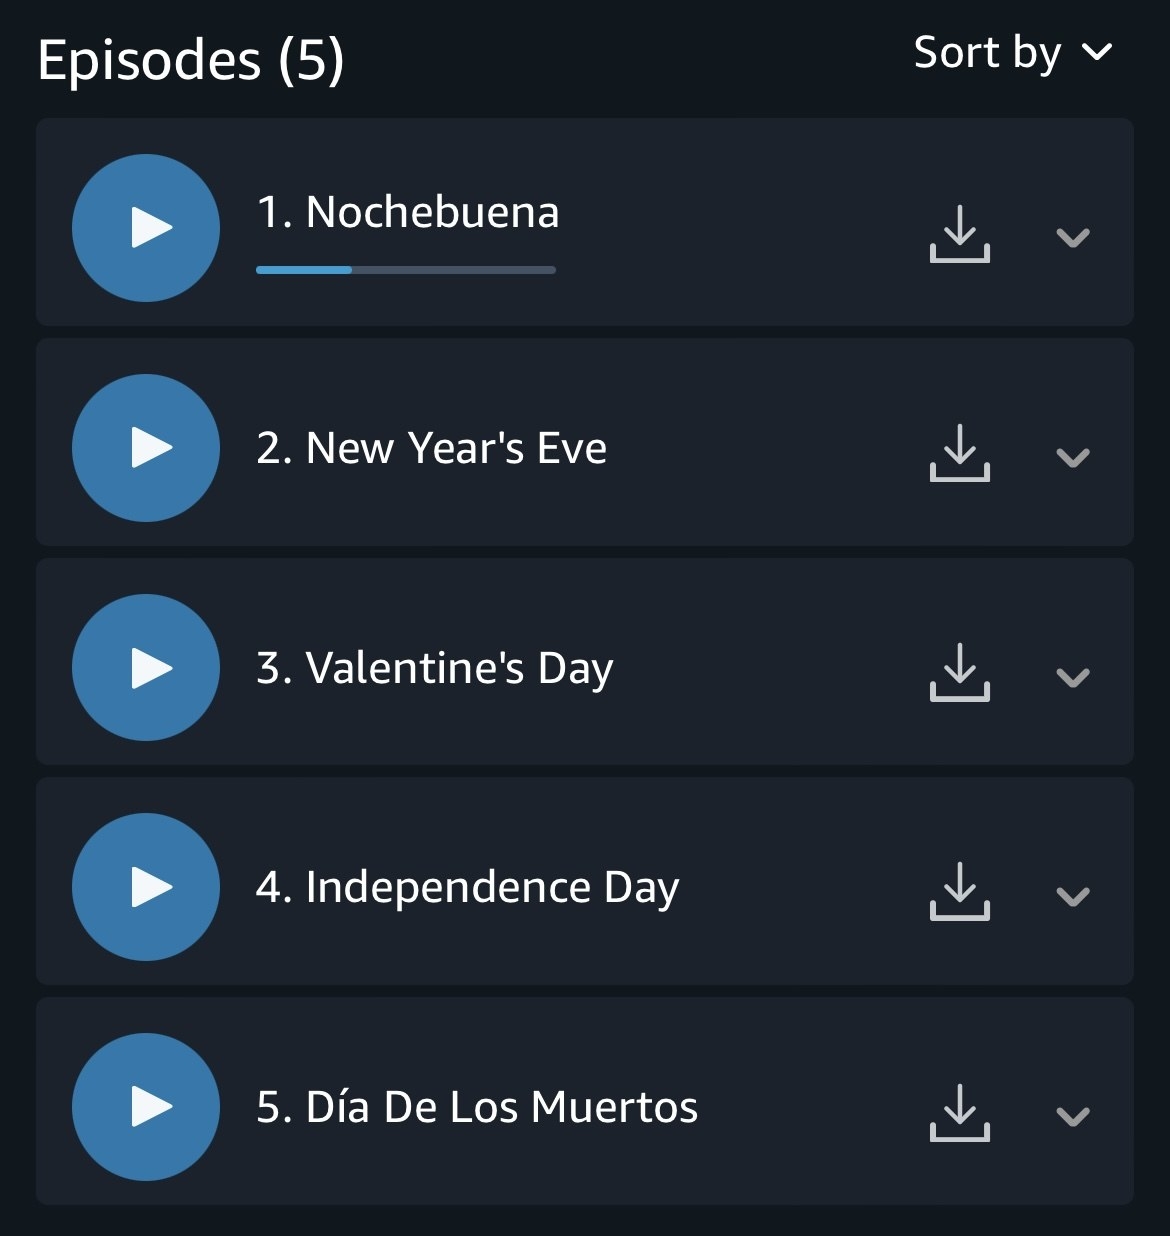 The titles of each episode, which are: &quot;Nochebuena, New Year&#x27;s Eve, Valentine&#x27;s Day, Independence Day, and Dia de los Muertos&quot;